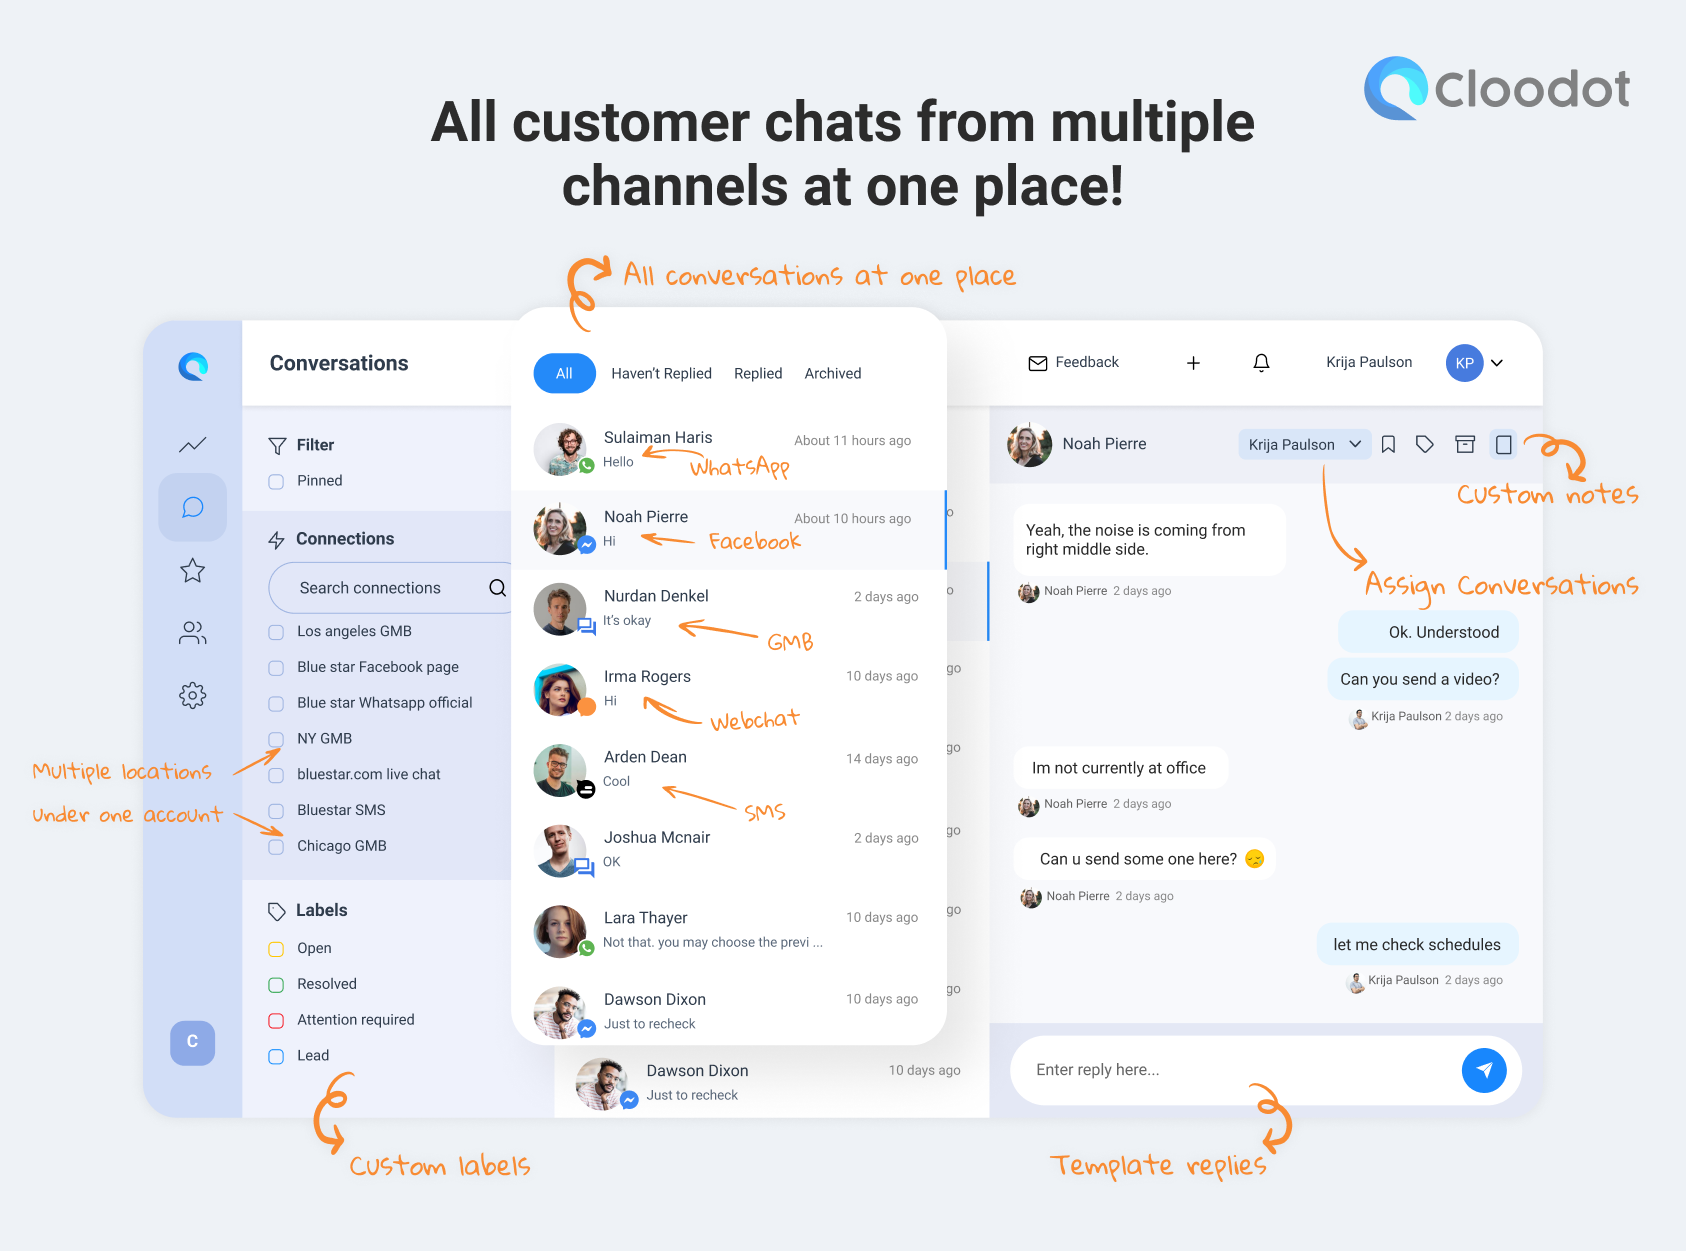 All customer chats from multiple channels at one place!